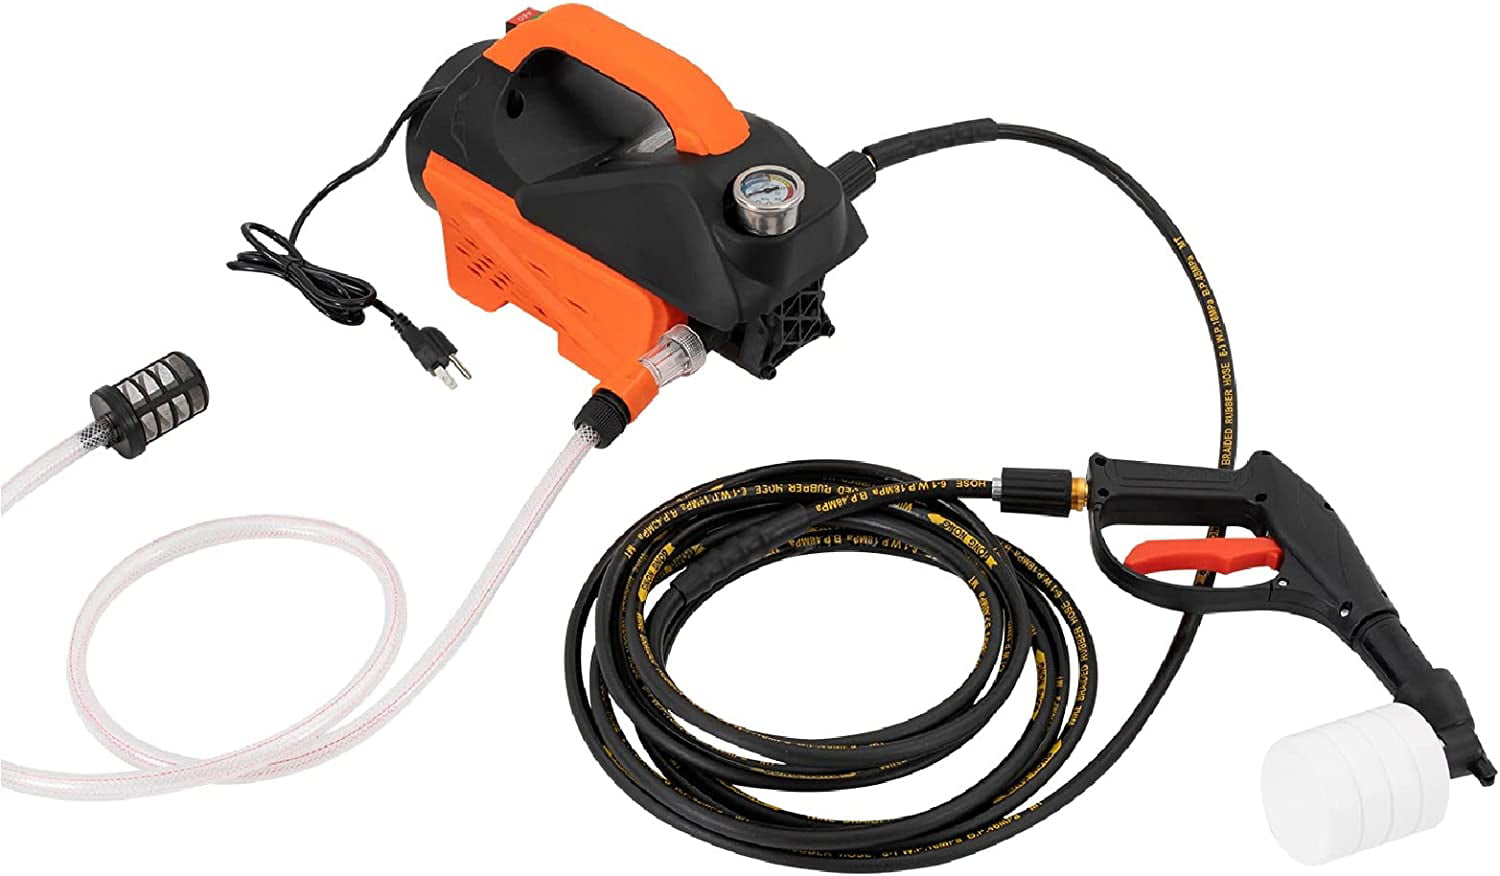 Oukaning Portable Electric Pressure Washer, 1300W High Pressure Electric Cleaner Spray Gun,for Cleaning Cars, Siding, Patio, Yard, Size: 16.1 x 11.4 x